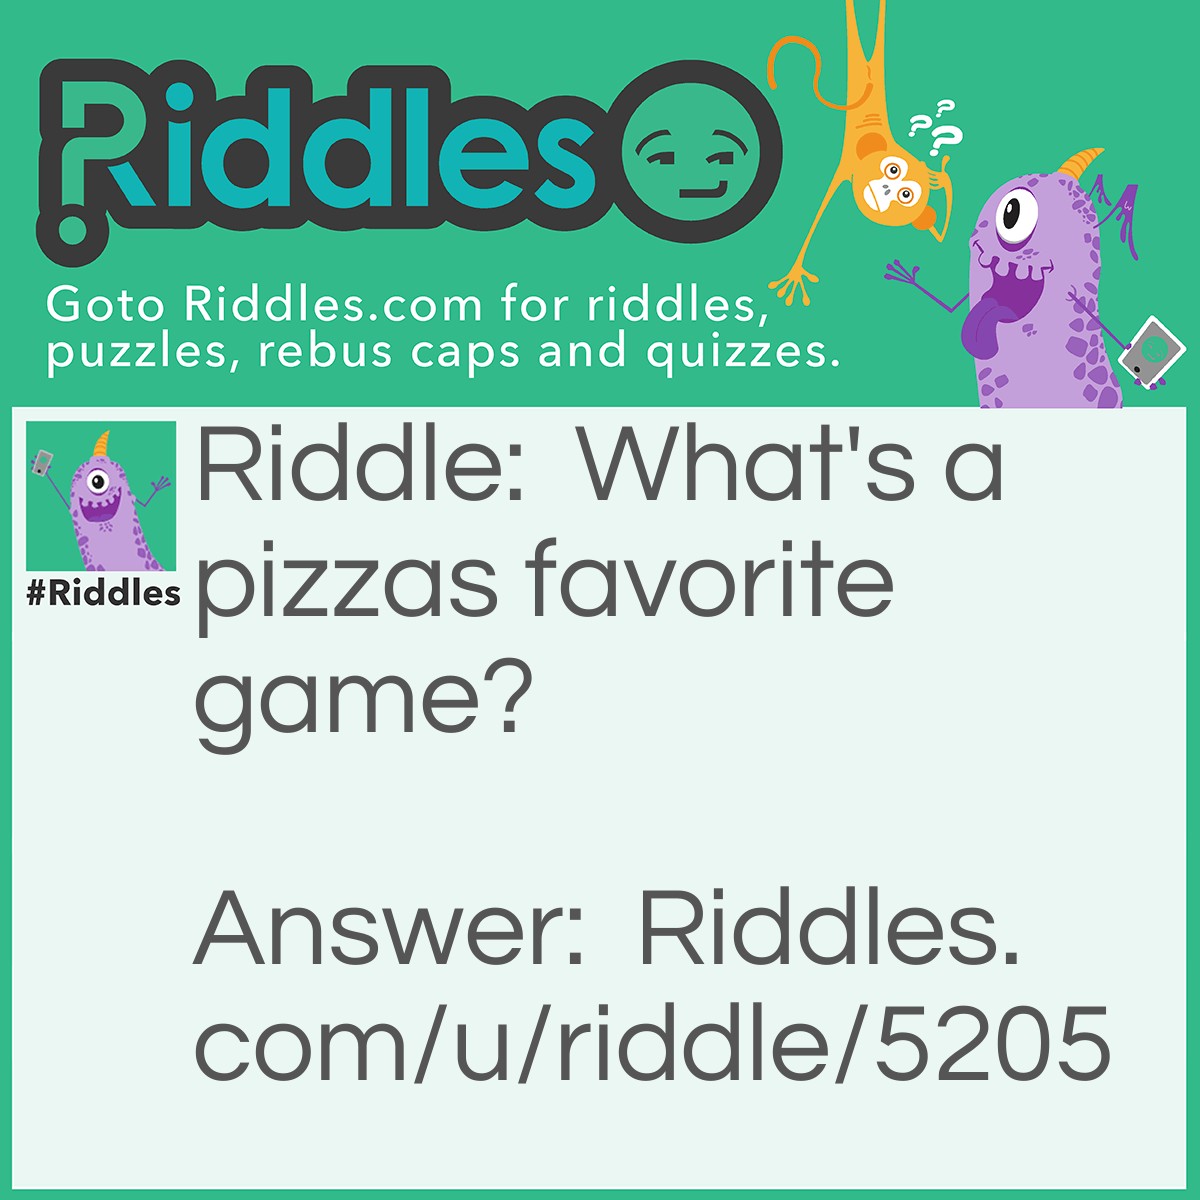 Riddle: What's a pizzas favorite game? Answer: Dominos.